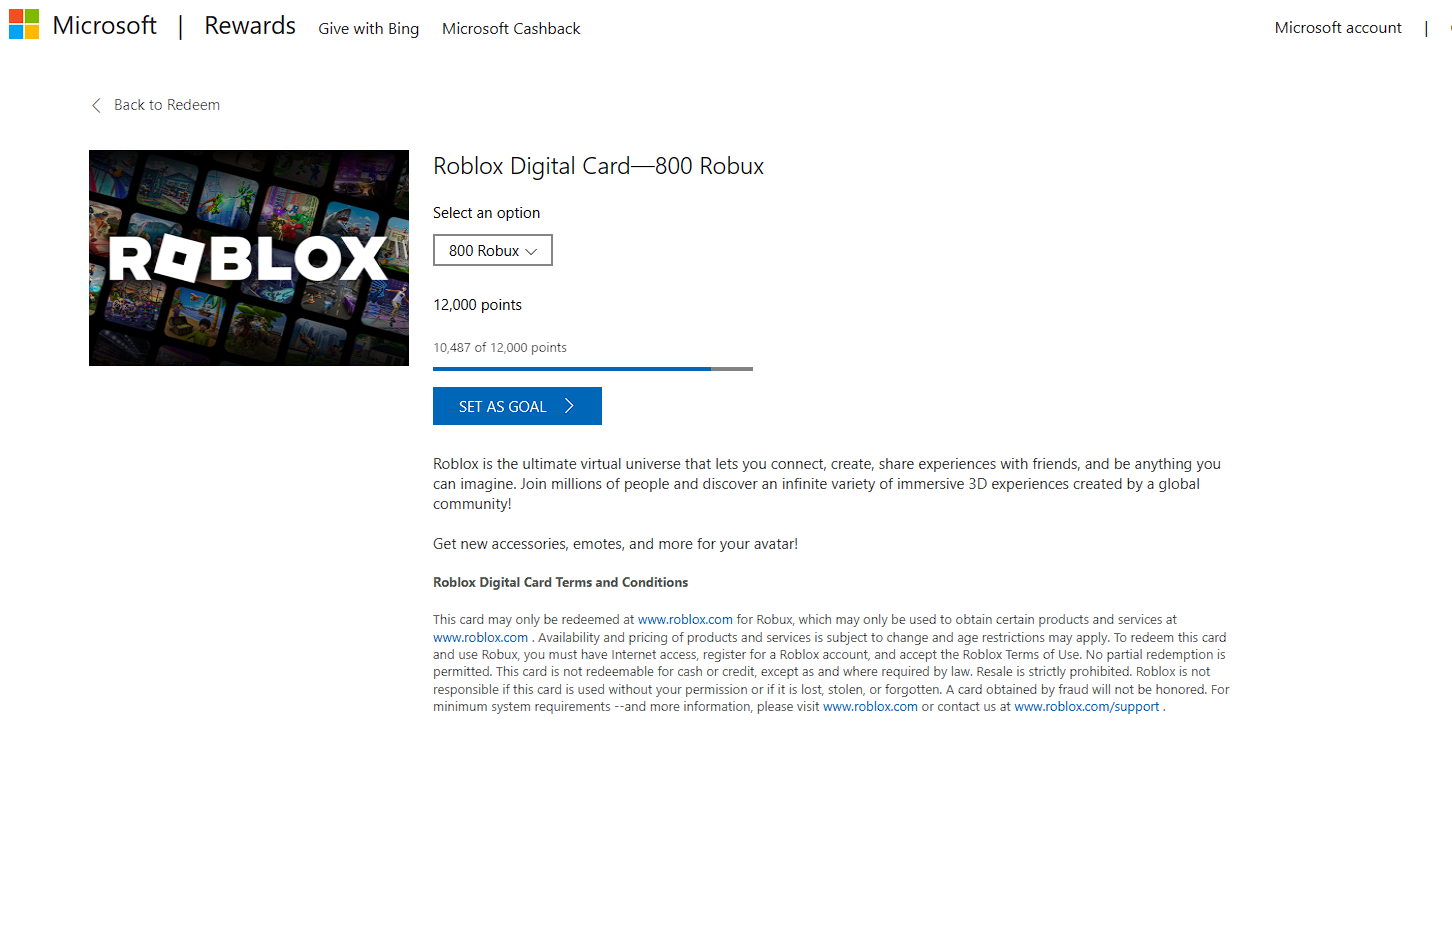 earn robux with microsoft rewards